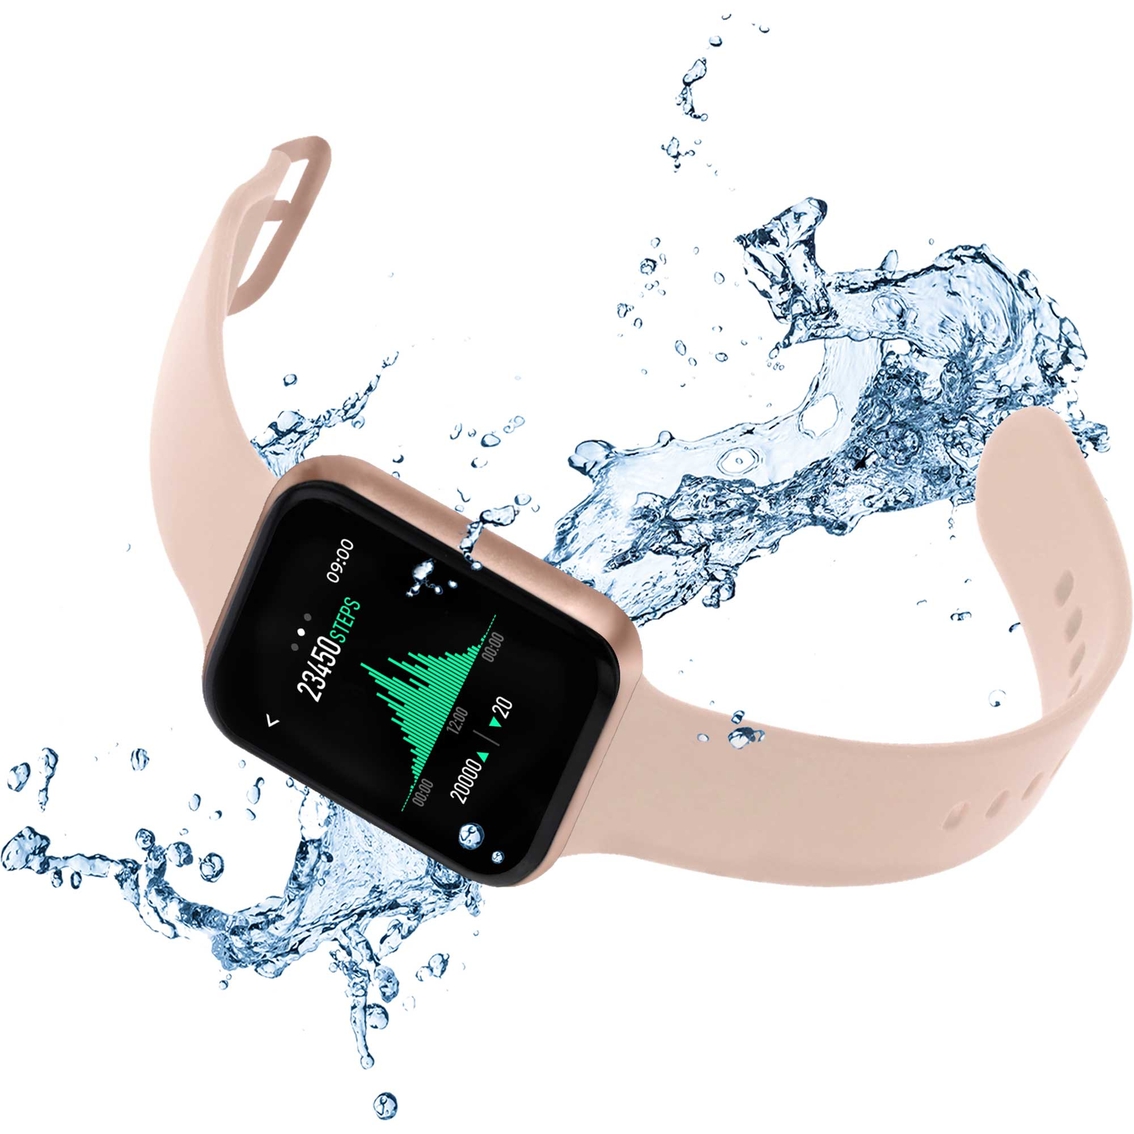 iTouch Air 3 Smartwatch Fitness Tracker Rose Gold Case Blush Strap 500009R-0-51-C12 - Image 3 of 5